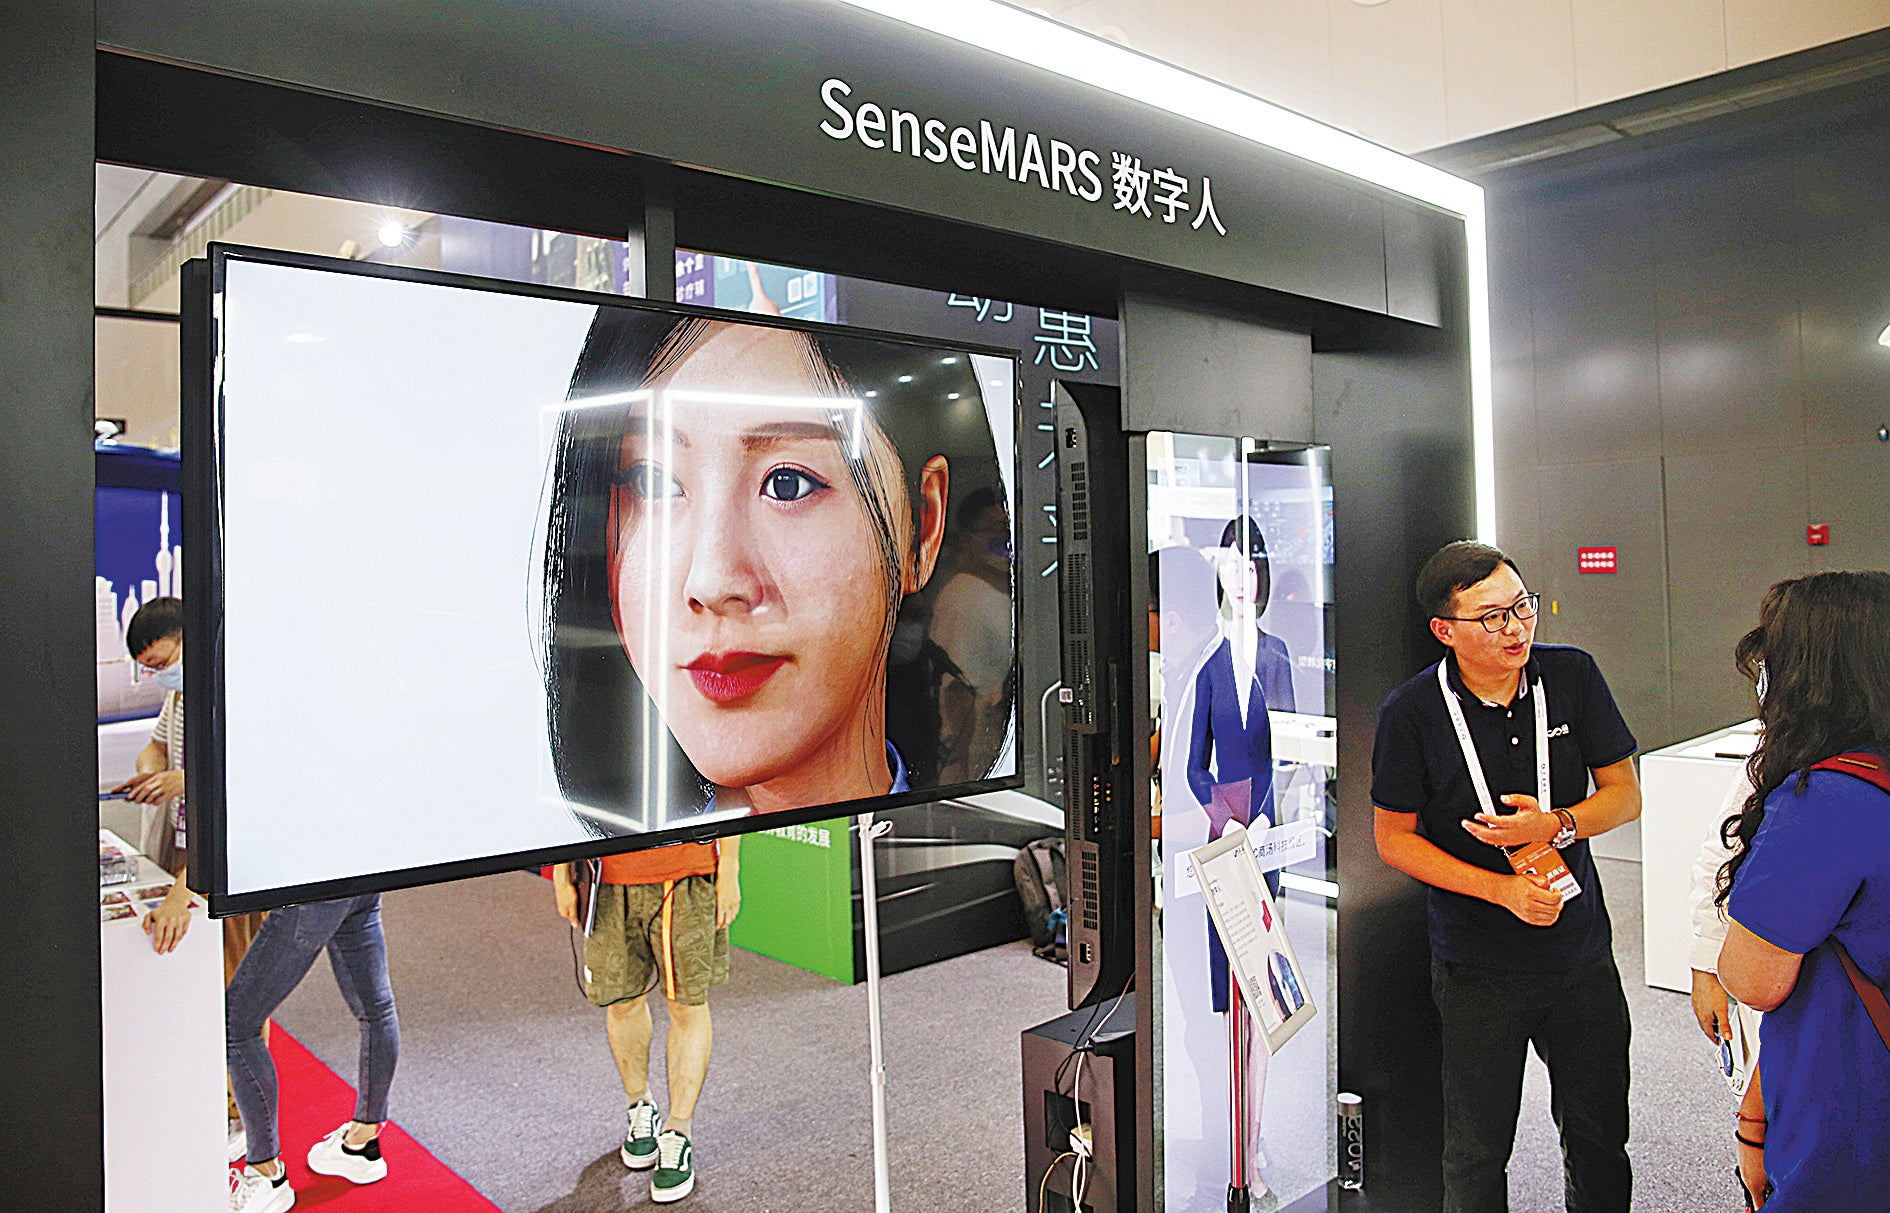 A high-fidelity digital human, developed by SenseTime, on display at the World Artificial Intelligence Conference in Shanghai in July 2021